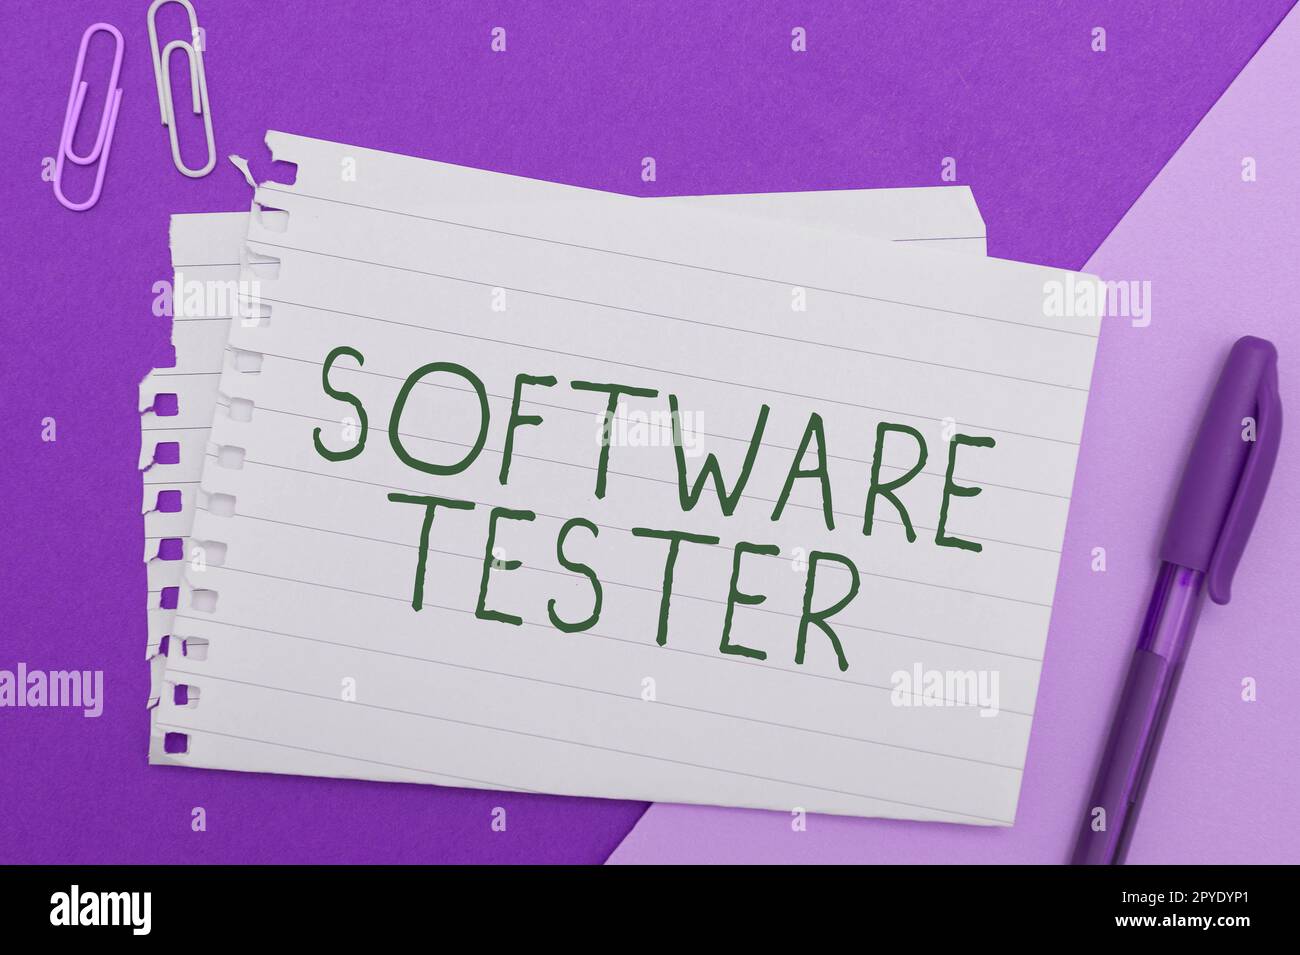 Inspiration showing sign Software Tester. Business concept implemented to protect software against malicious attack Stock Photo